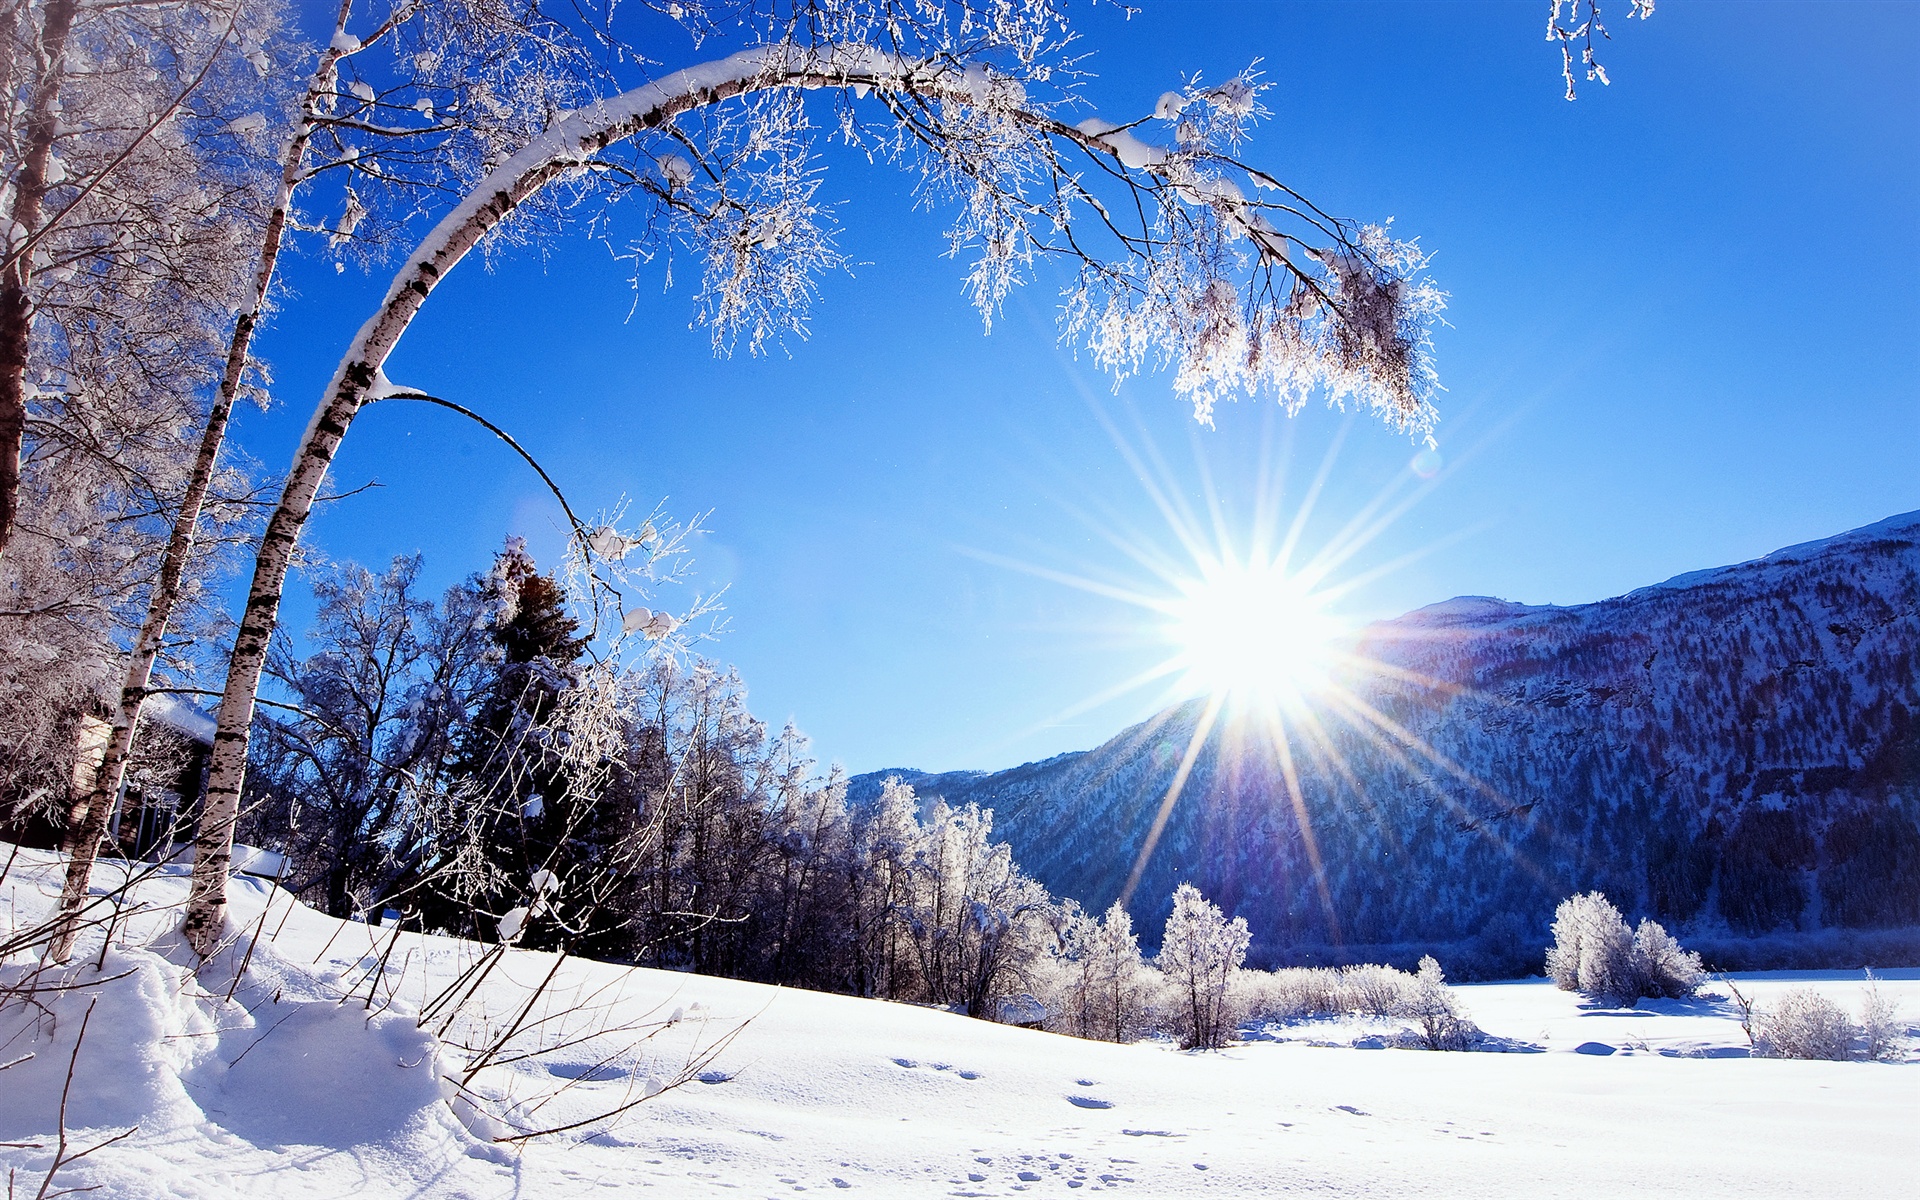 Winter mountains scenery